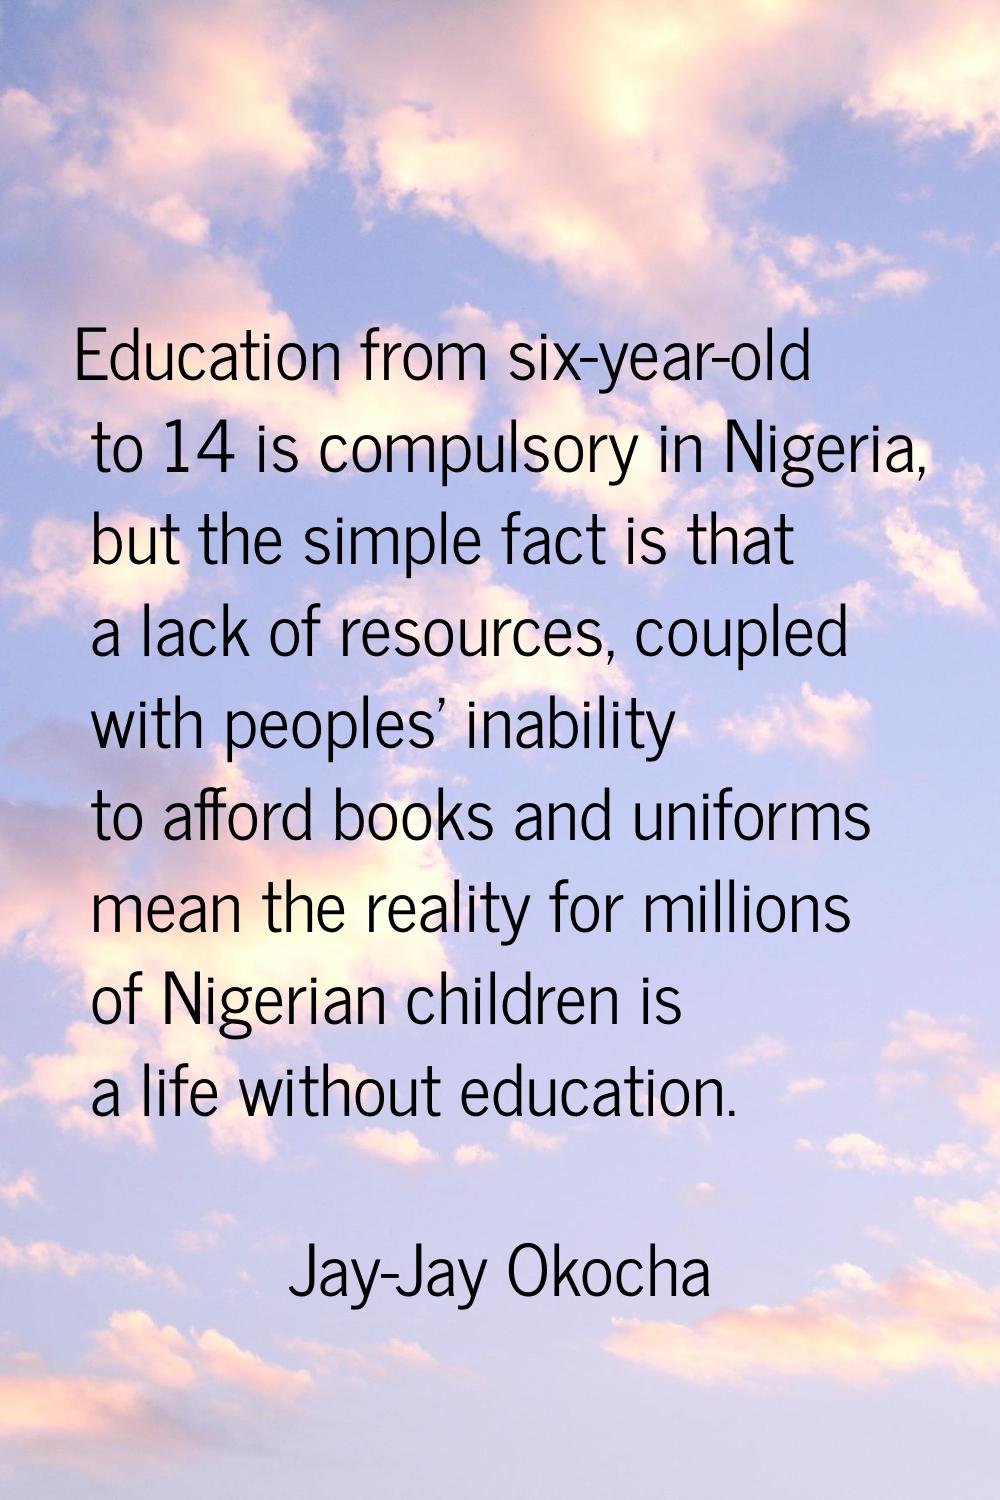 Education from six-year-old to 14 is compulsory in Nigeria, but the simple fact is that a lack of r